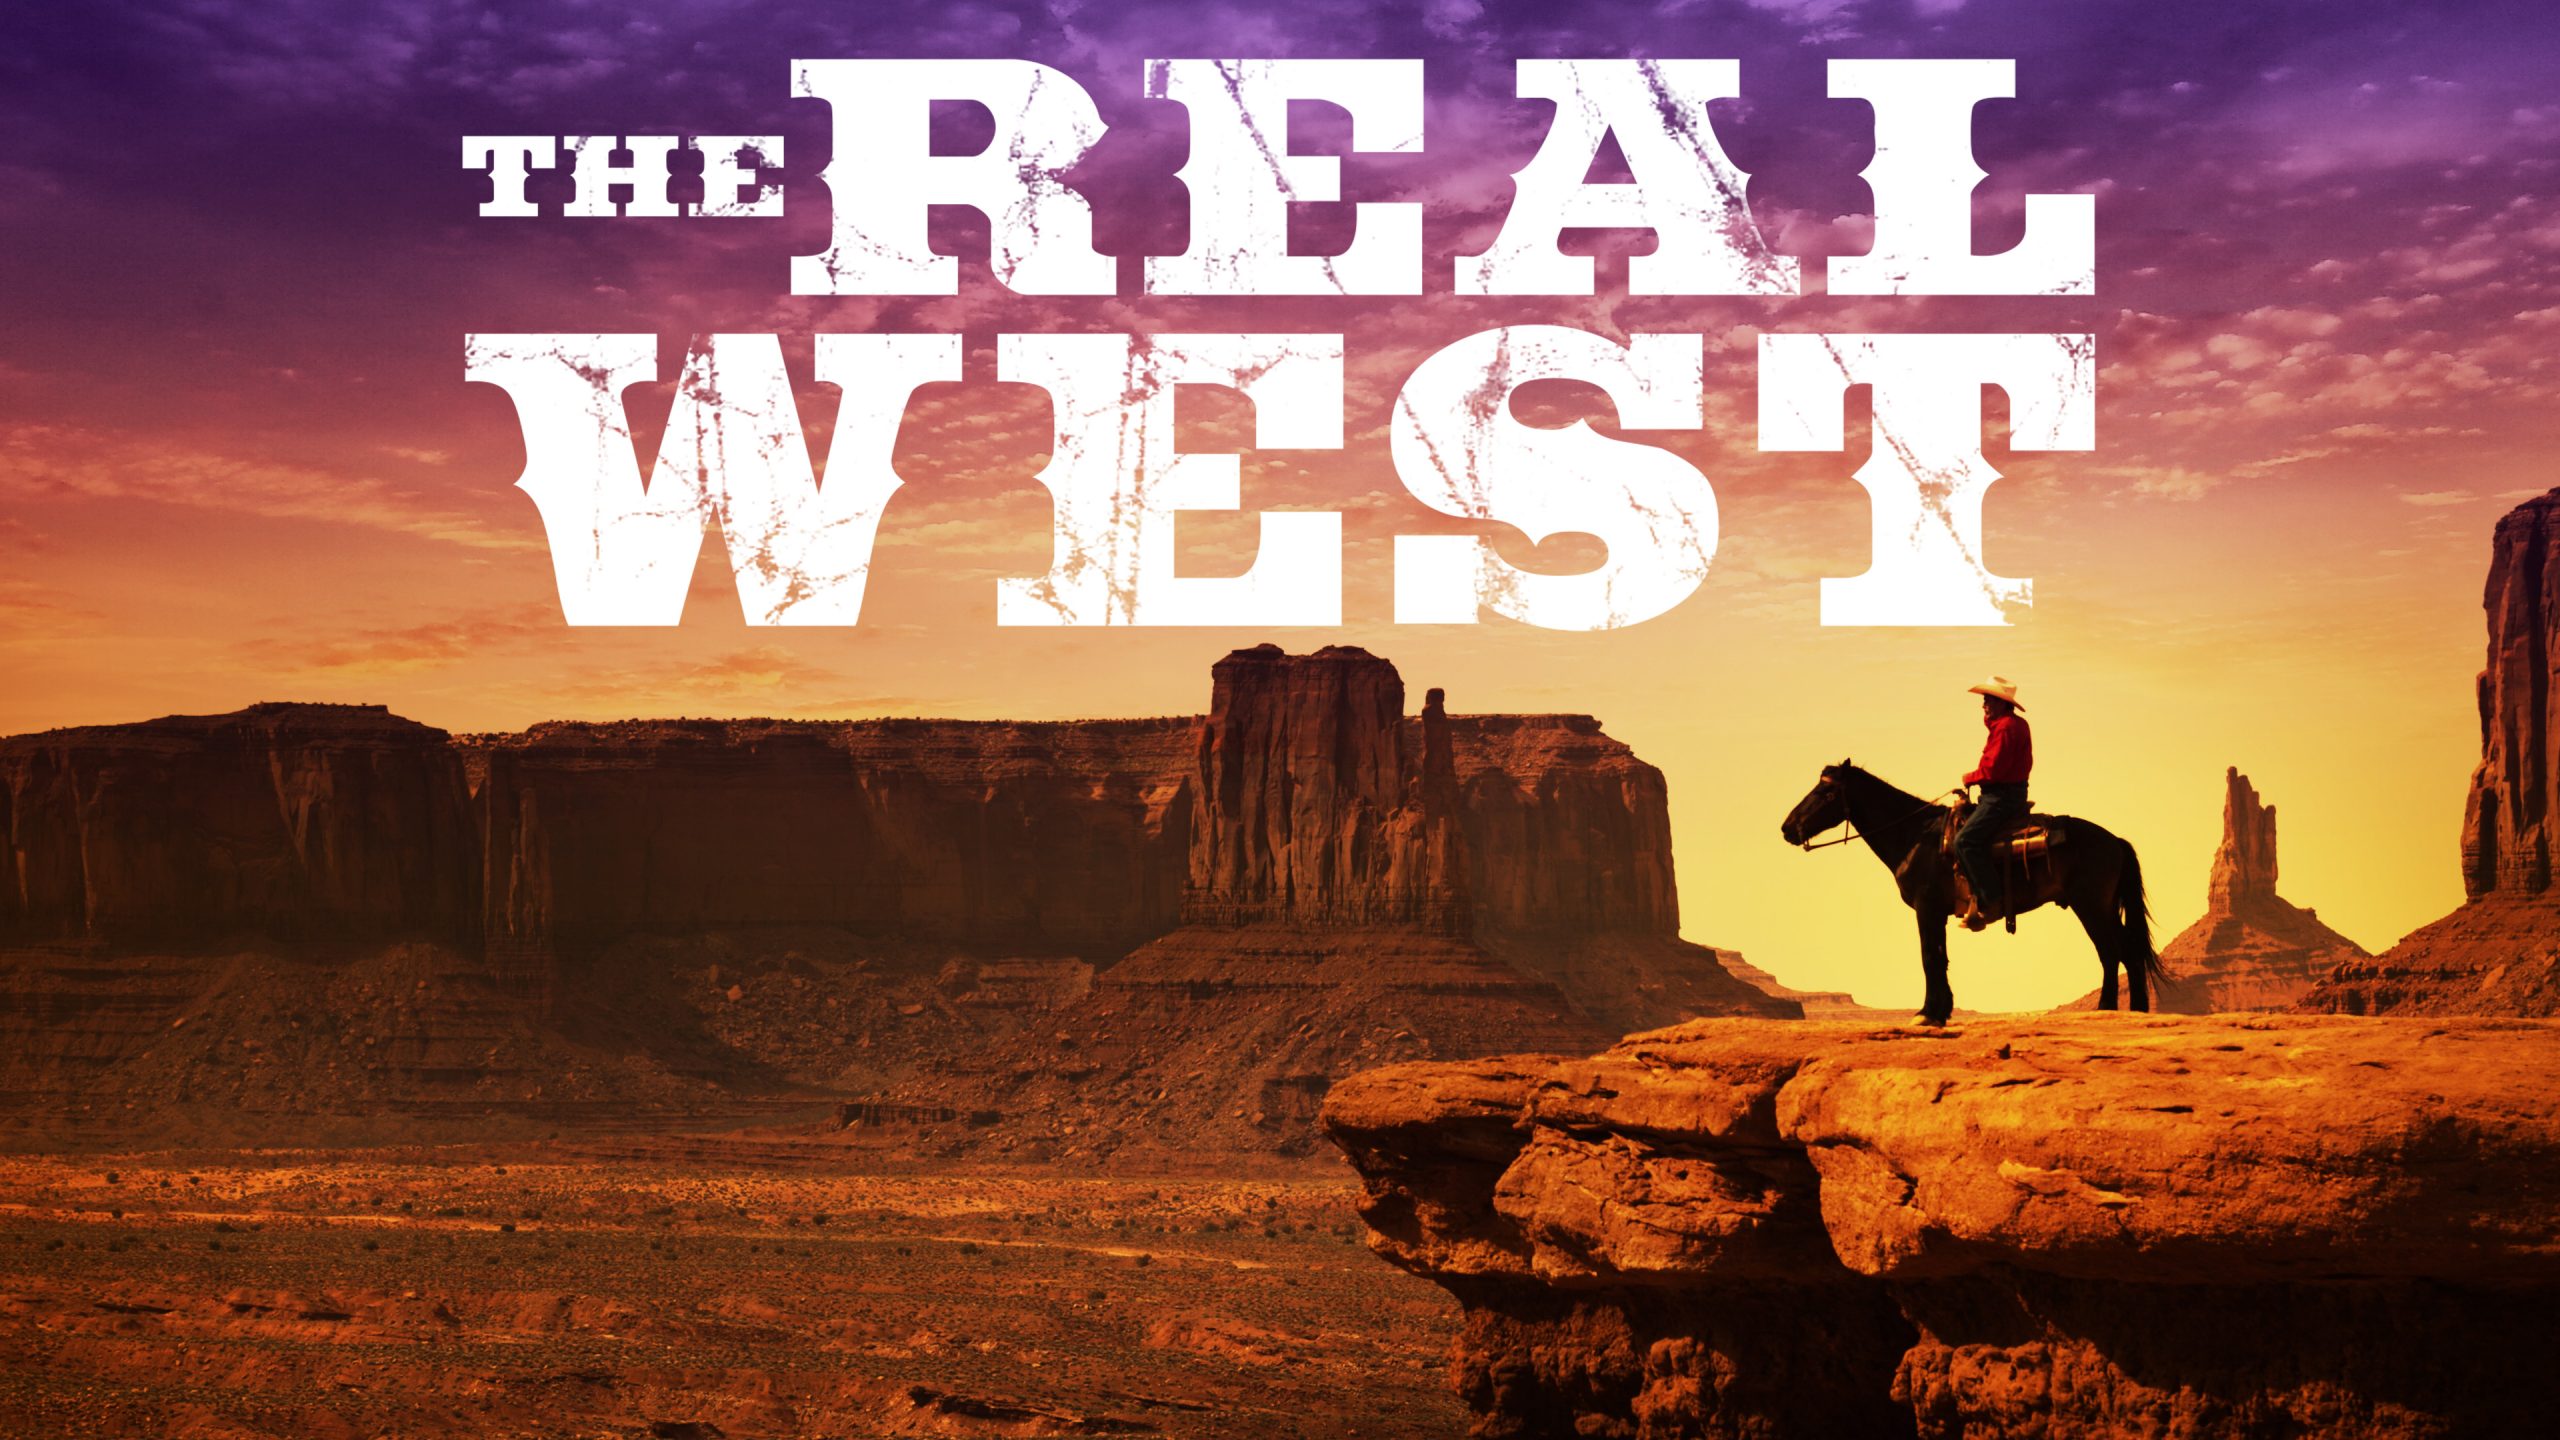 Watch 'The Real West' on HISTORY Vault	